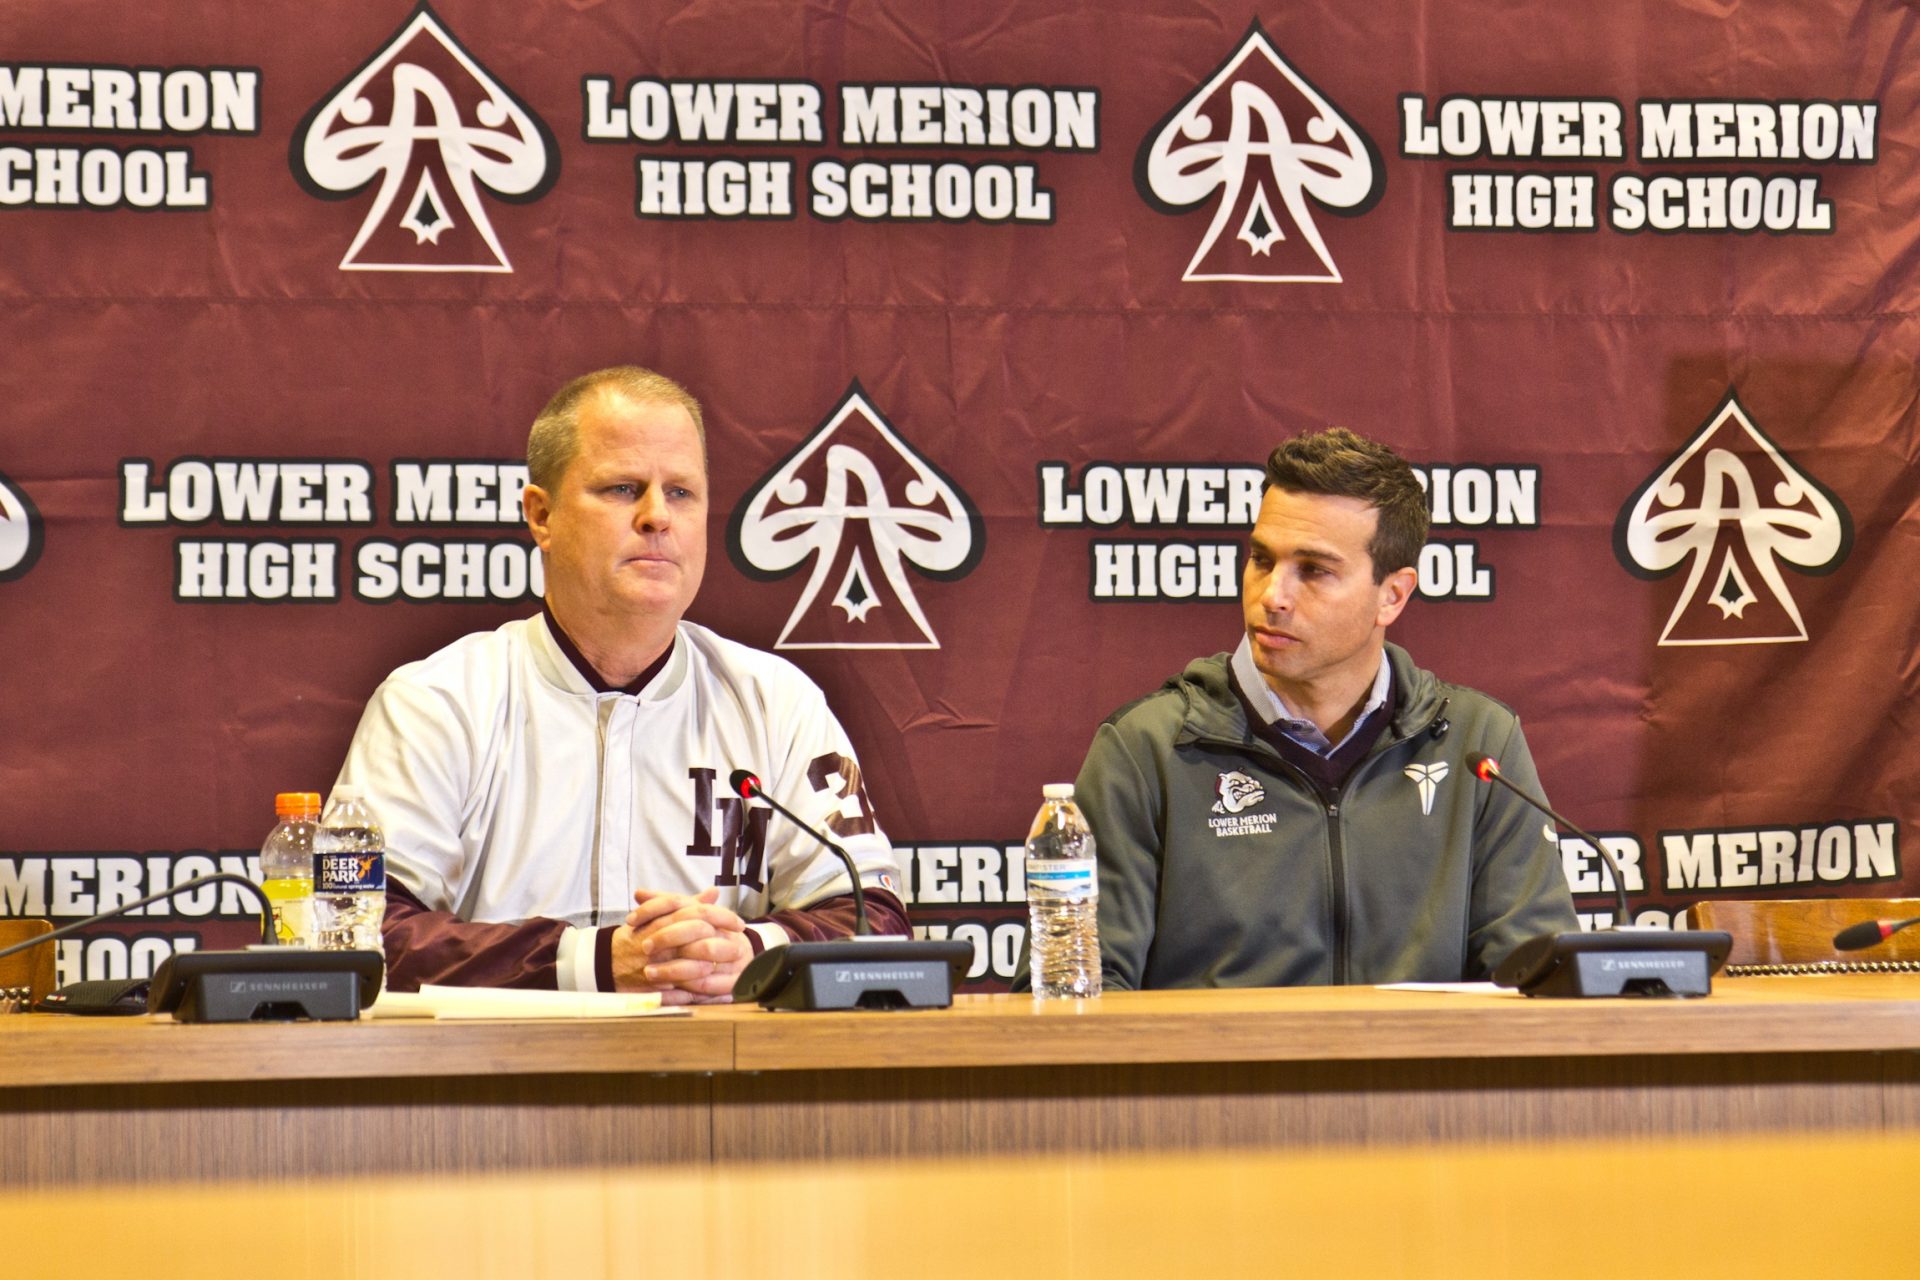 Kobe Bryant’s former coach Gregg Downer (left) and teammate Doug Young (right) held a press conference to talk about the late basketball superstar at his former high school in Lower Merion.